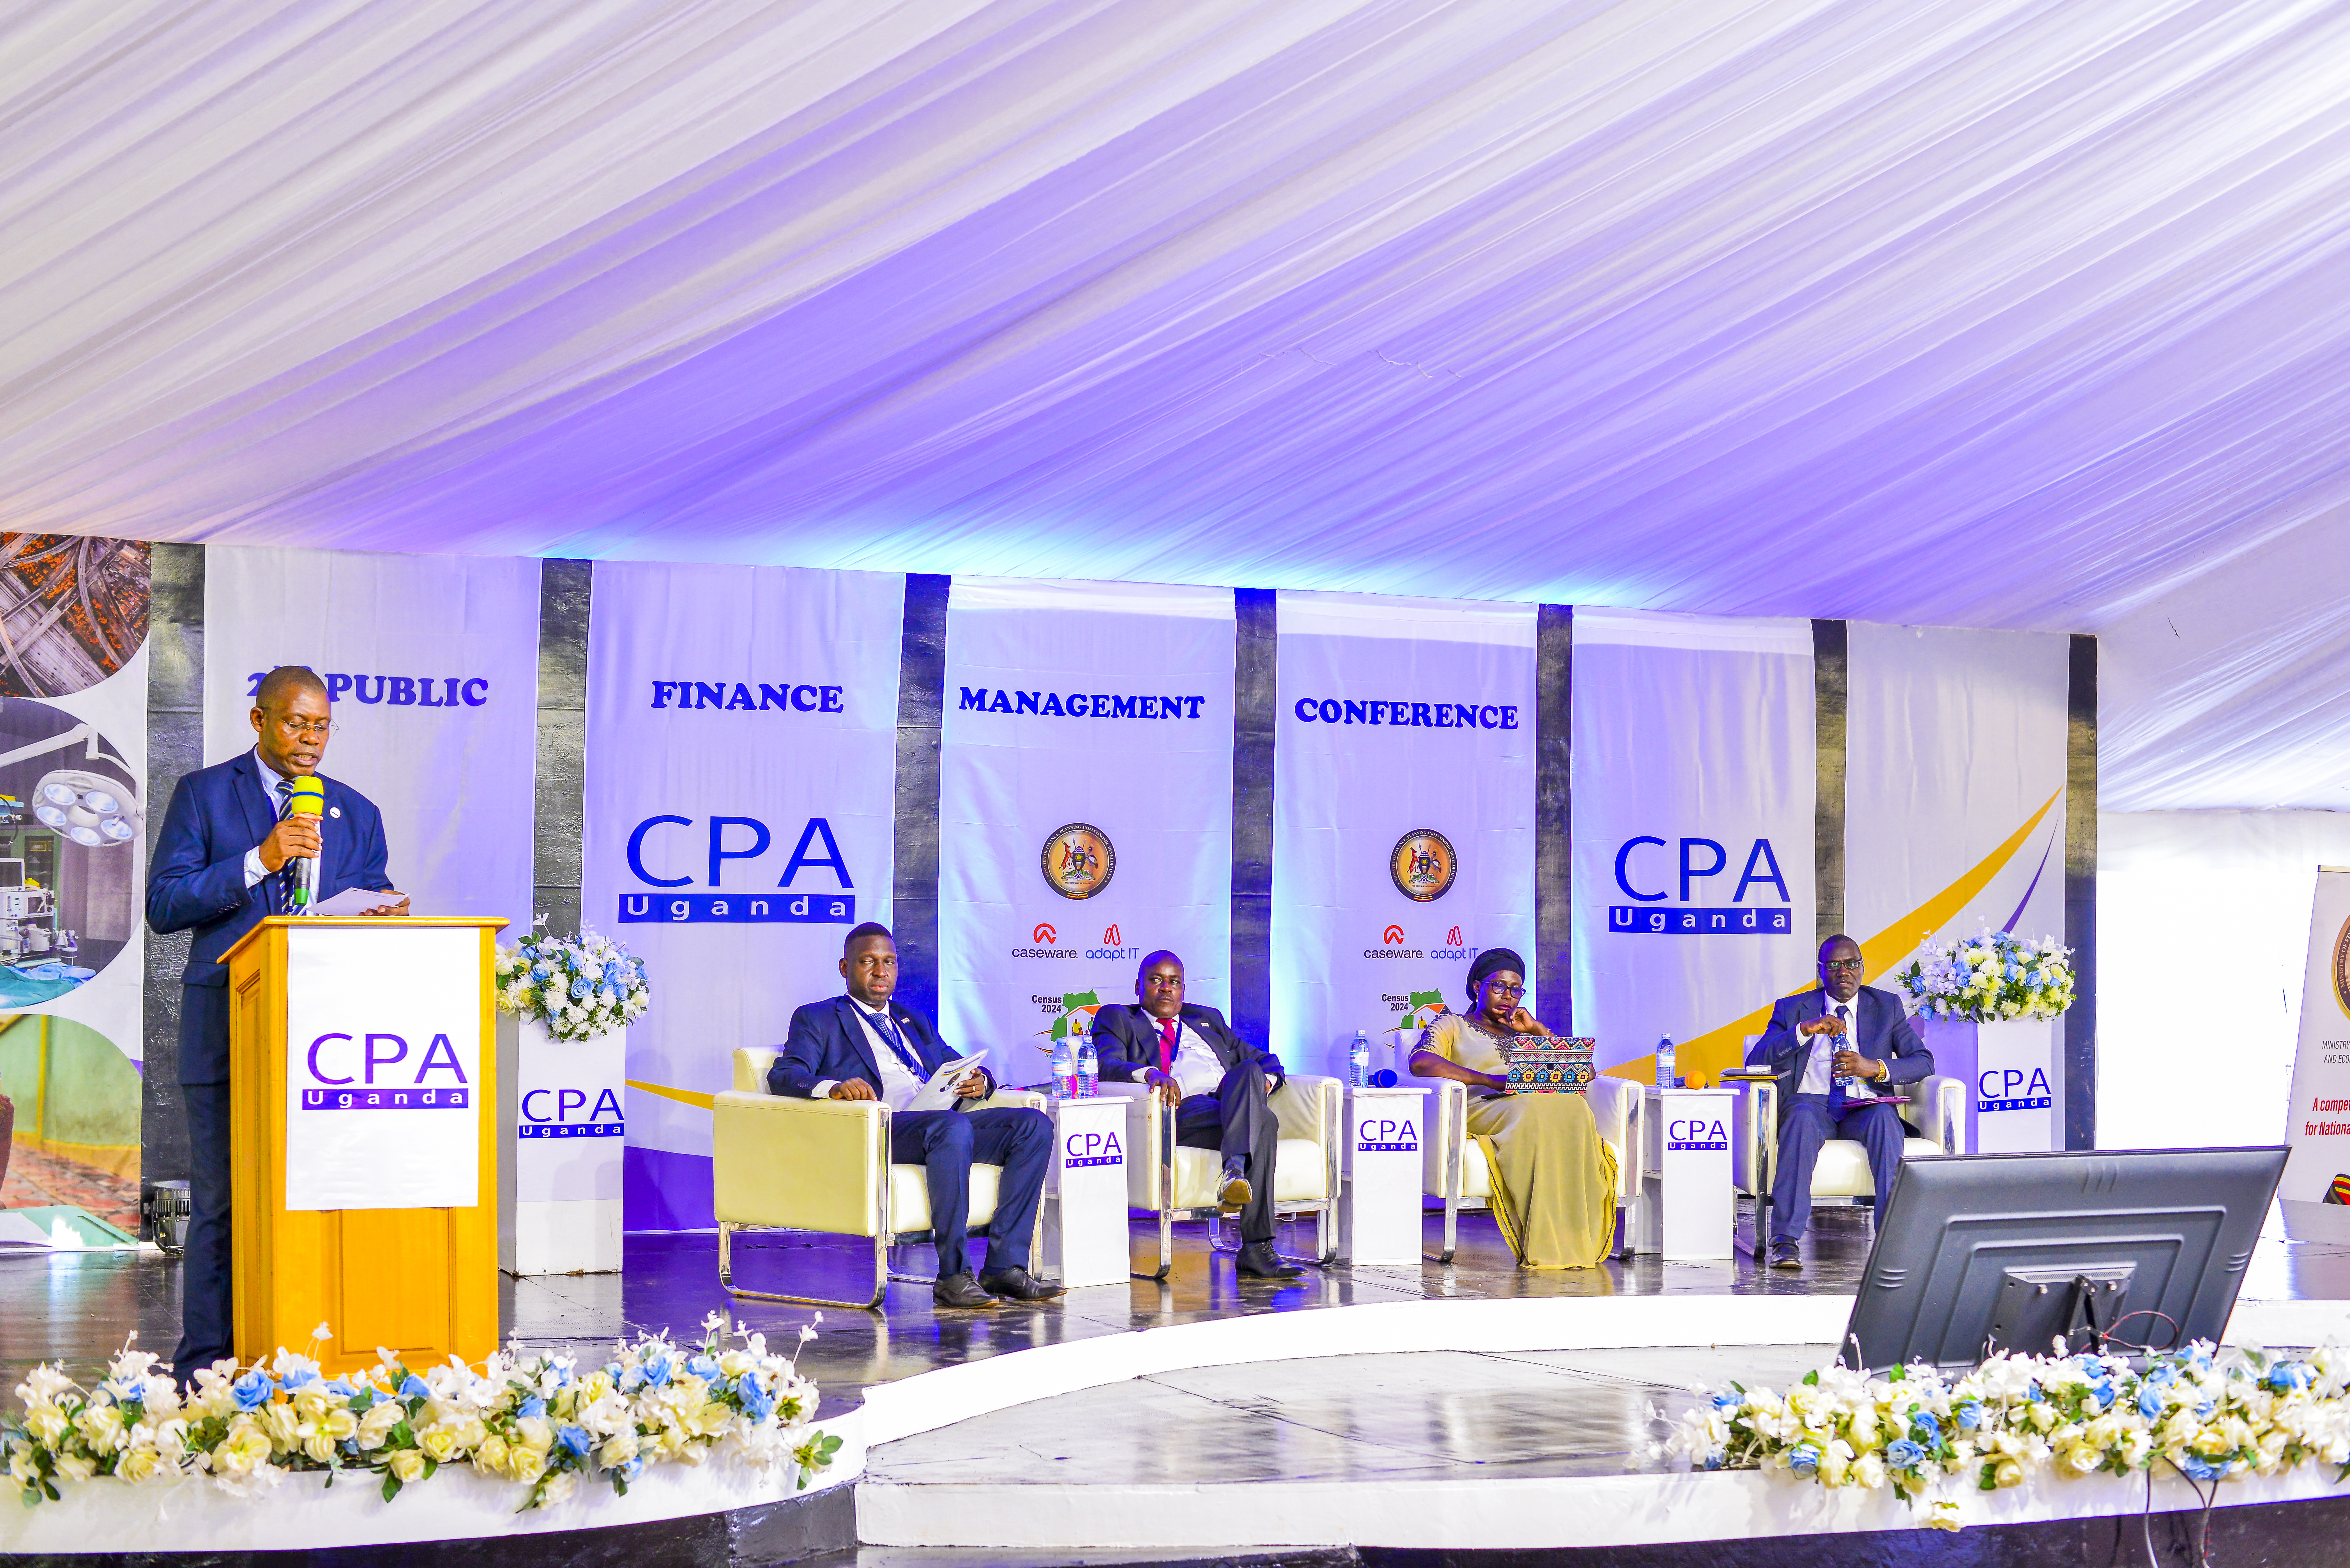 The panel at the opening ceremony of the 2nd PFM Conference. (L-R) CPA Derick Nkajja - ICPAU Council Secretary/ CEO (speaking), CPA Timothy Ediomu - ICPAU Council member, CPA Ronald Mutumba - ICPAU Vice President, CPA Keto Kayemba - PAFA President, with Prof. Vincent Bagire, the keynote speaker.